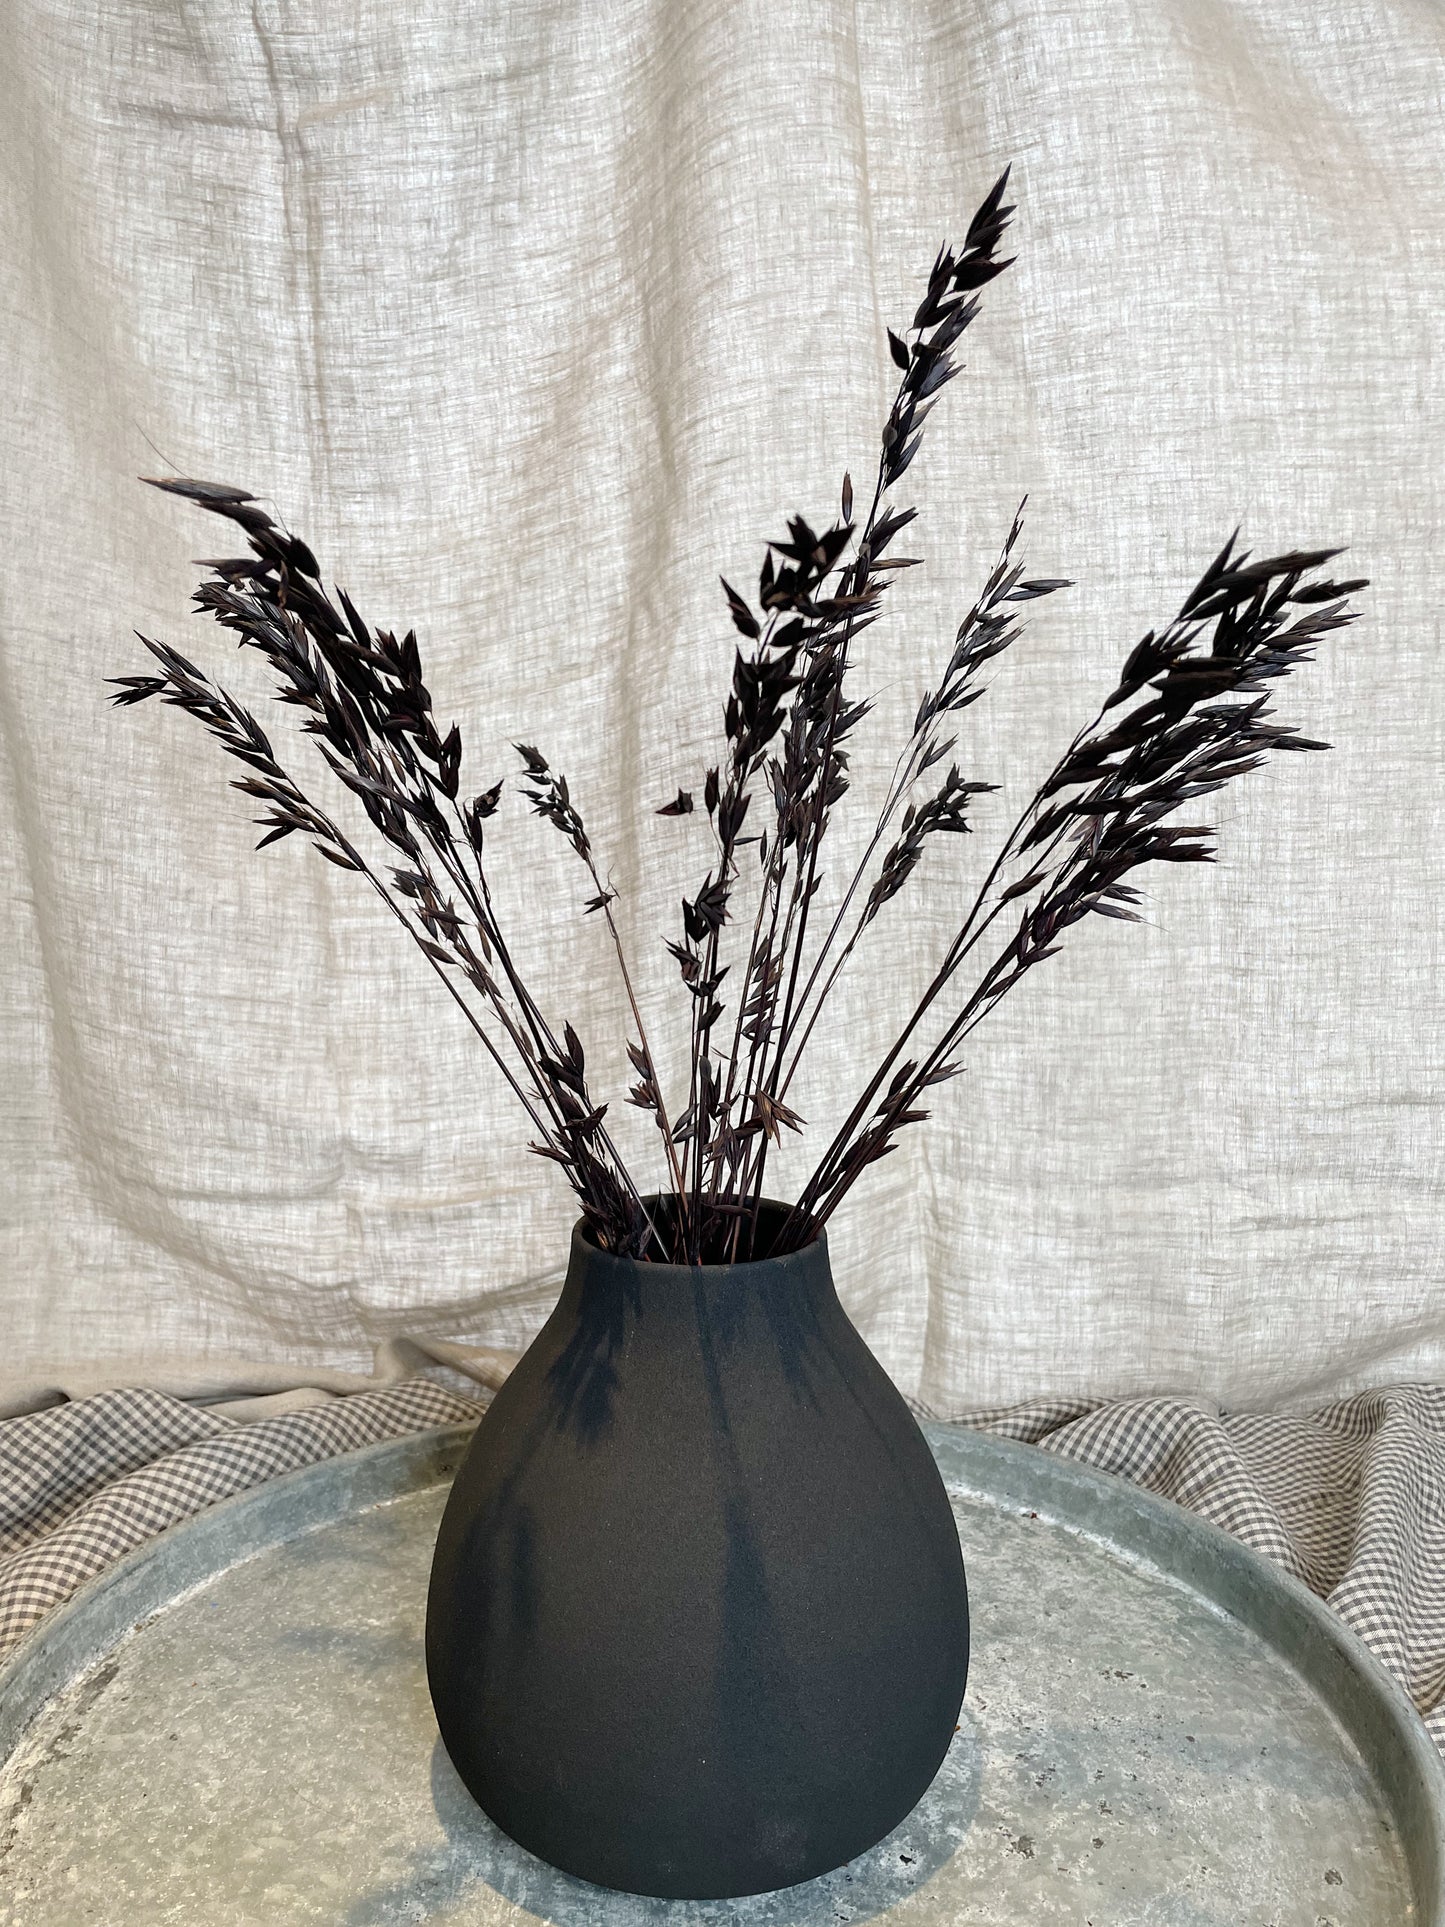 Black iron vase, filled with black dried flowers, on top of a metal tray and against a natural linen backdrop